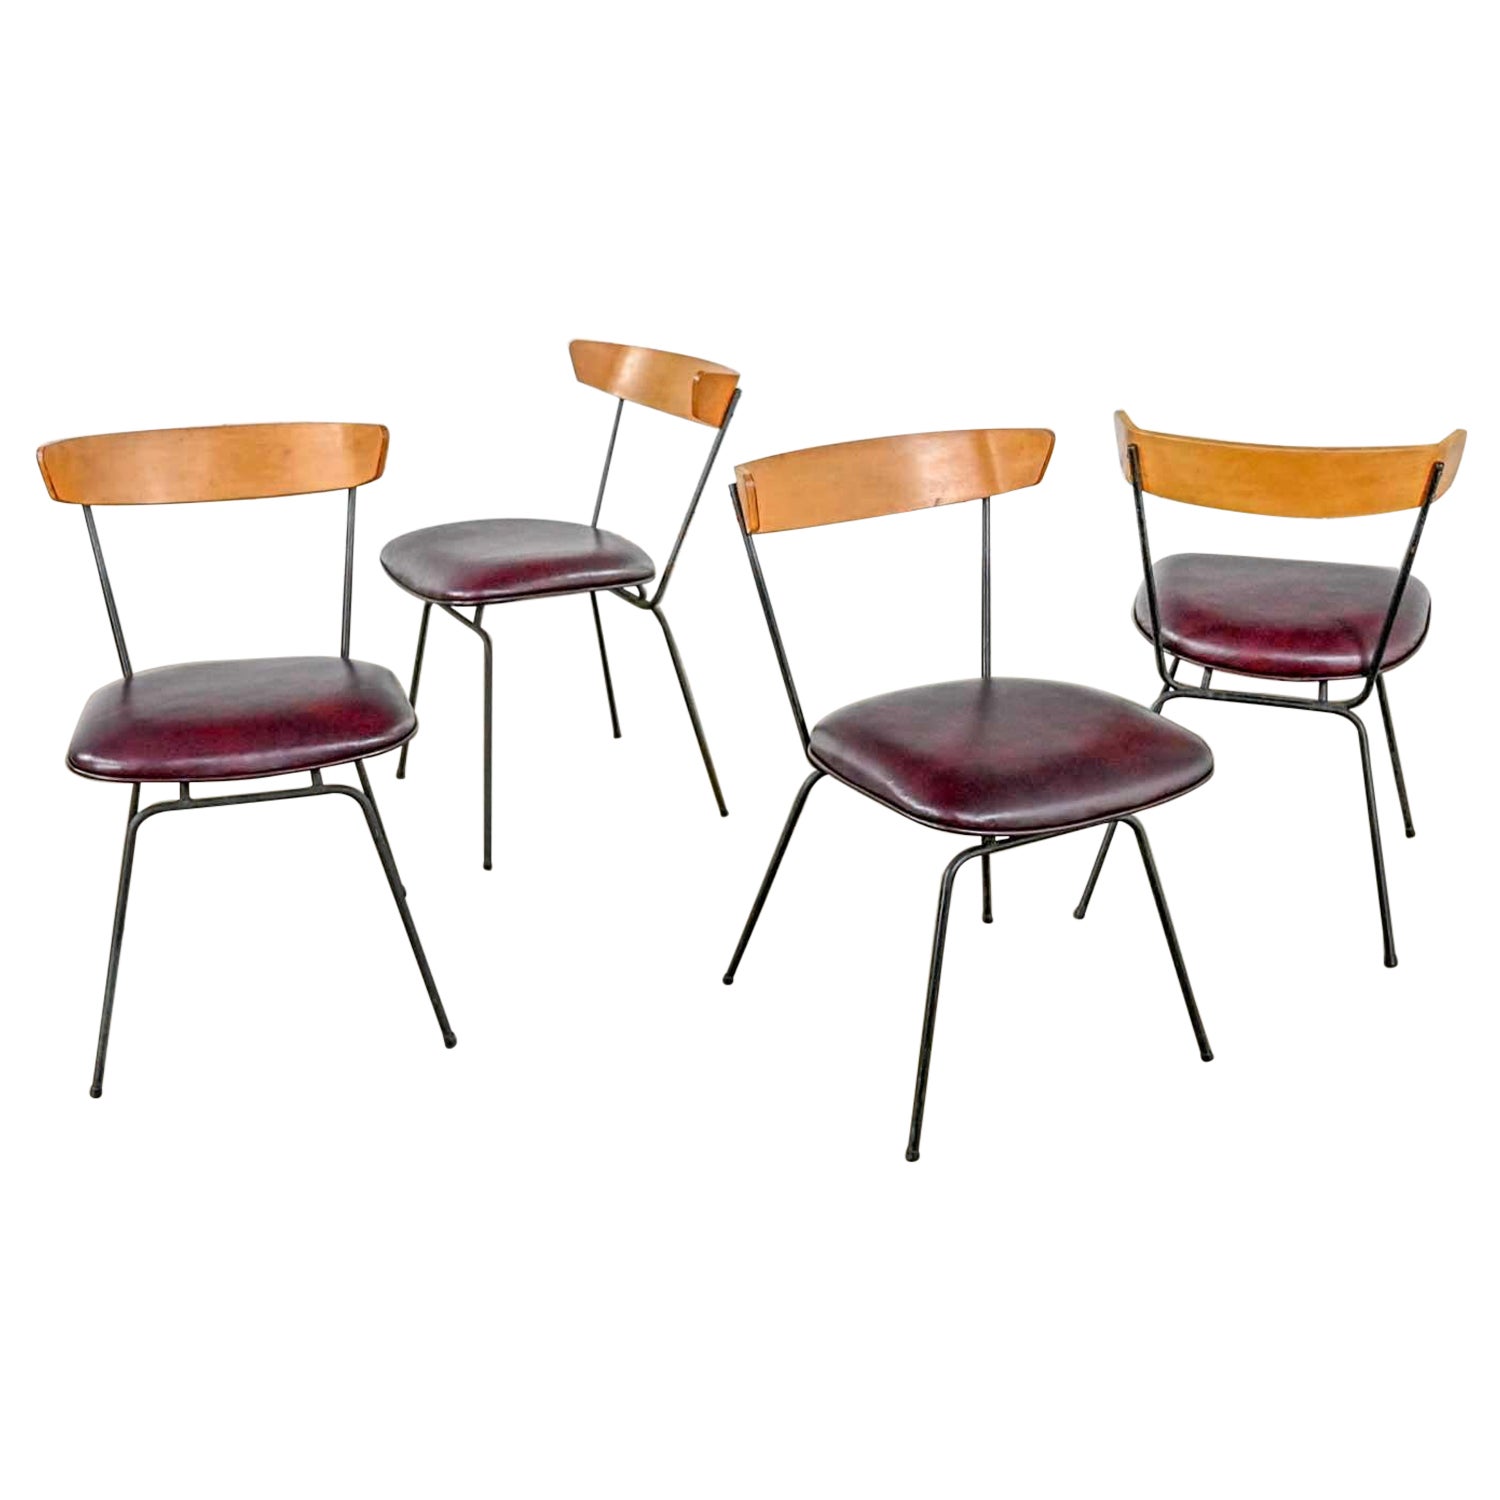 4 MCM Iron & Wood Dining Chairs Attributed to Clifford Pascoe for Modernmasters